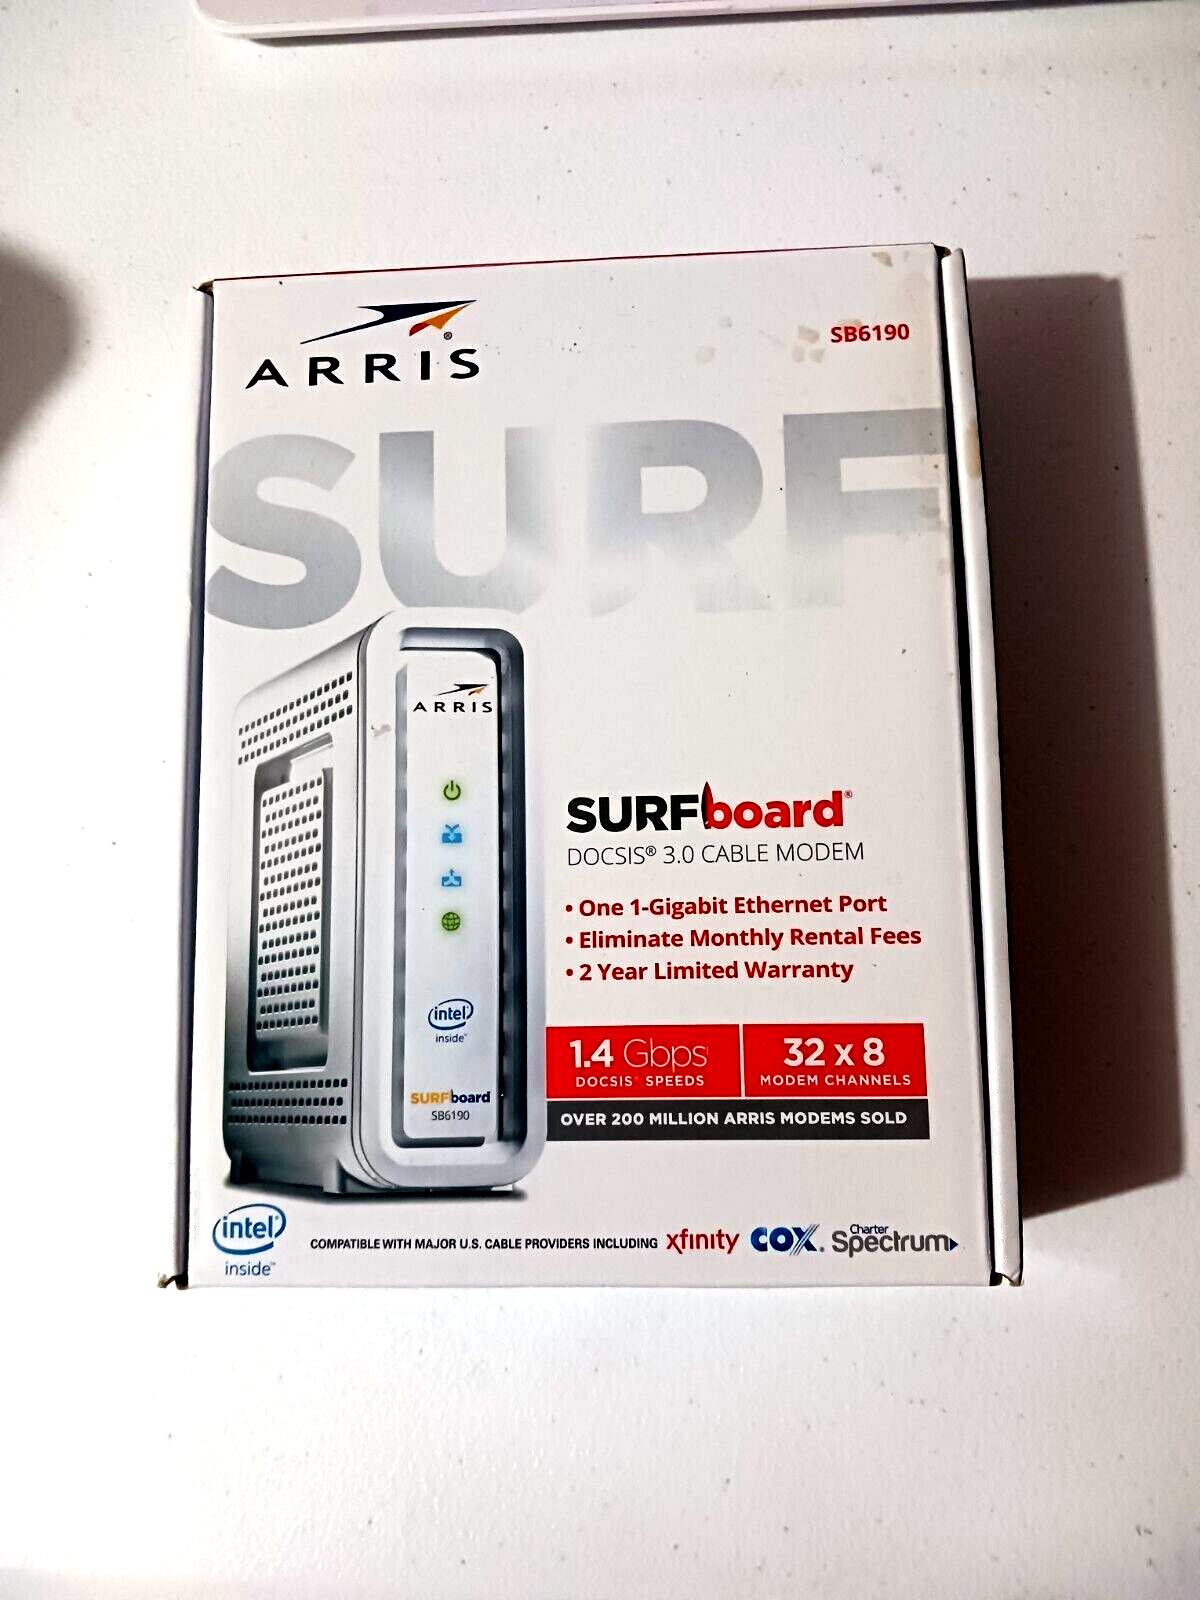 ARRIS  SURFBOARD 1.4 GBPS 3.0 CABLE MODEM